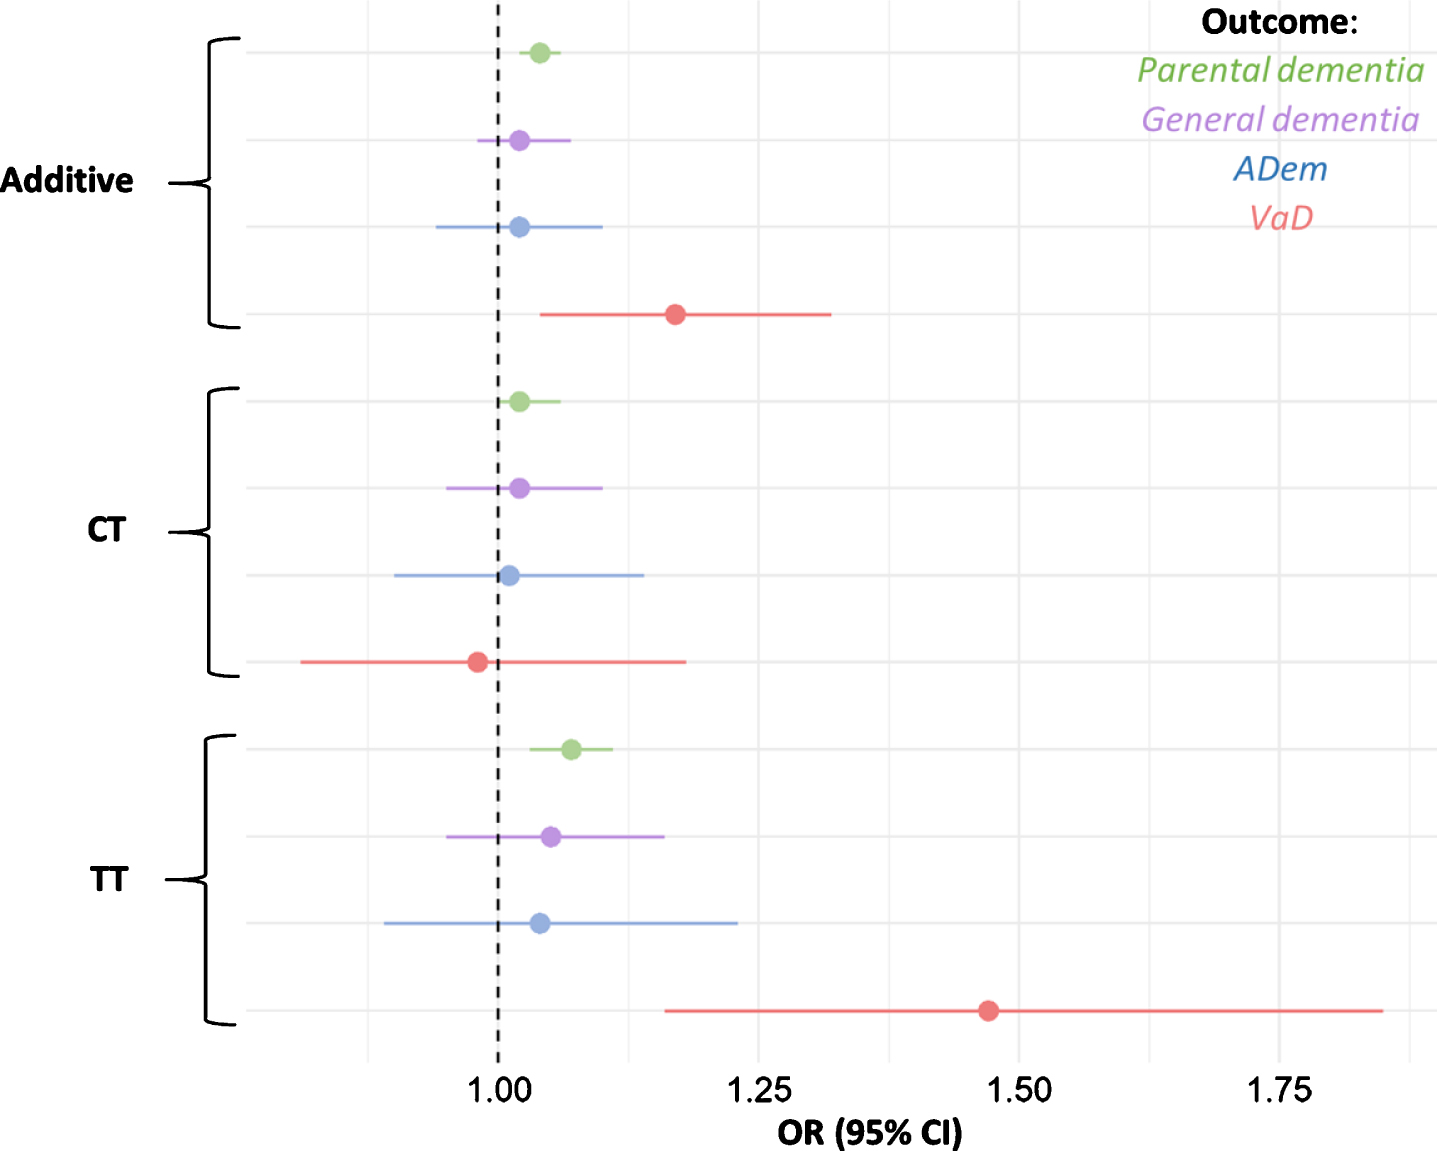 Odds ratios for parental dementia, ADem, and VaD per rs9923231 genotype status. Depicted are the additive effect and the effects of each allele group. The tails represent 95% confidence intervals for the ORs.